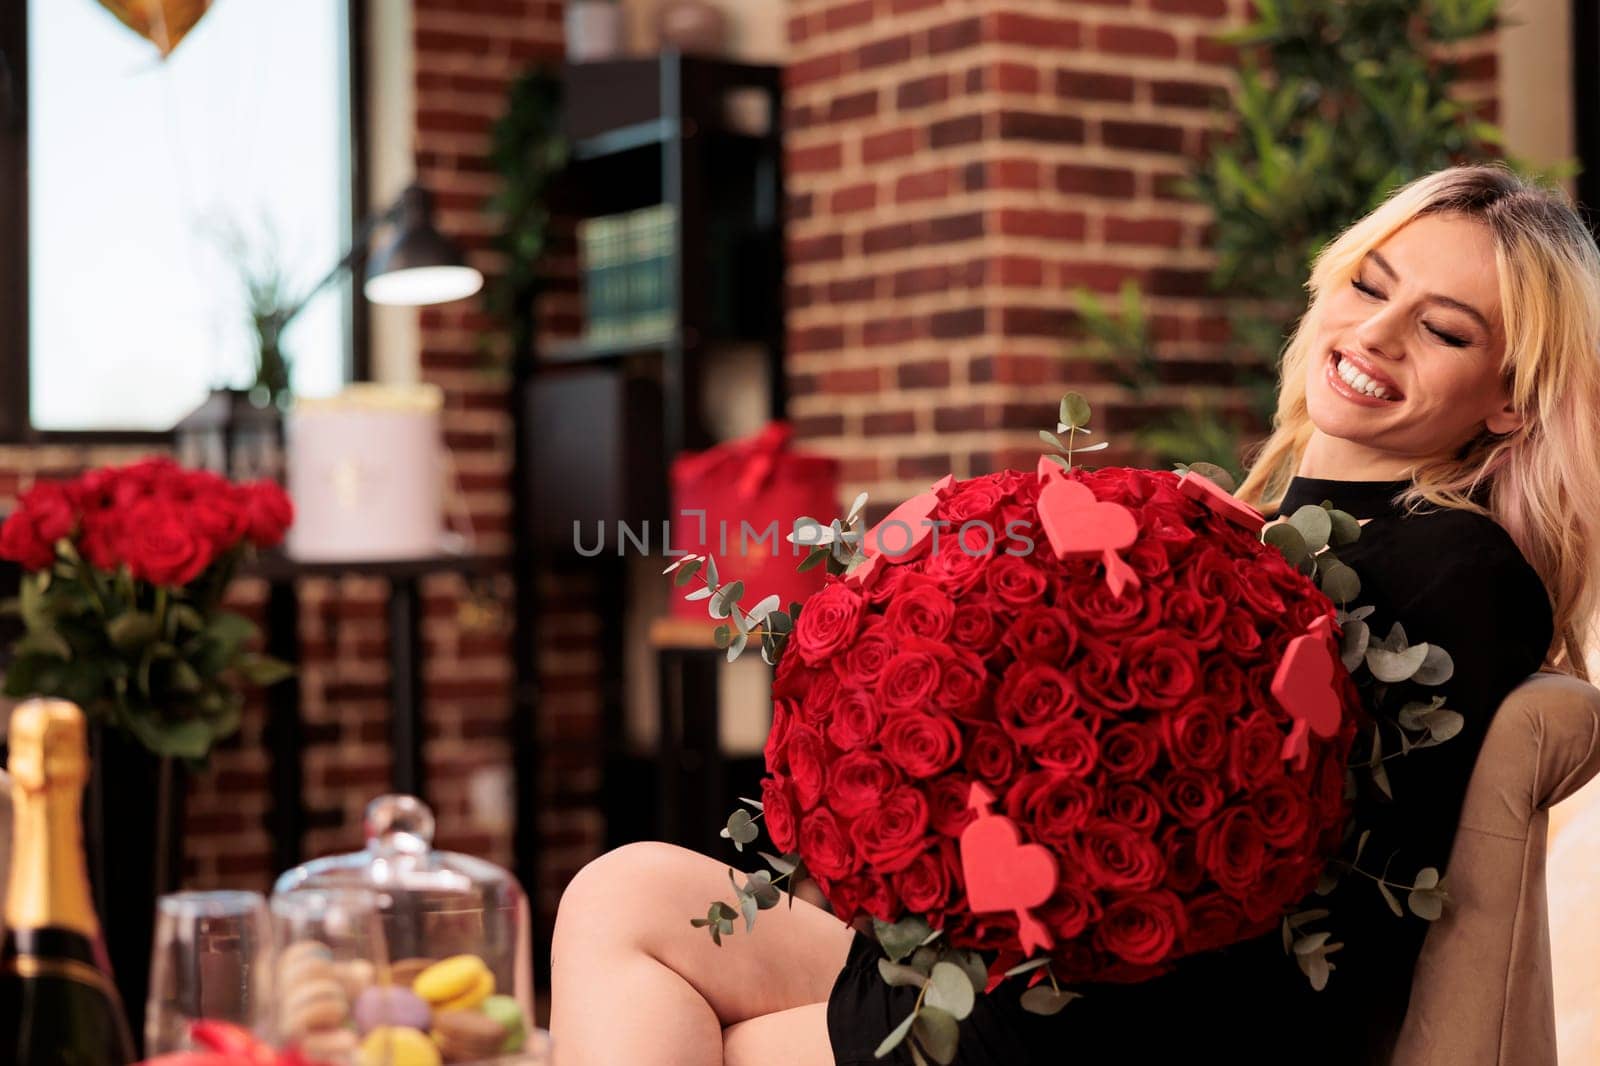 Girlfriend standing in living room filled with romantic gifts, holding red roses large bouquet. Beautiful blonde woman in elegant black dress enjoying celebrating valentine s day. Love concept